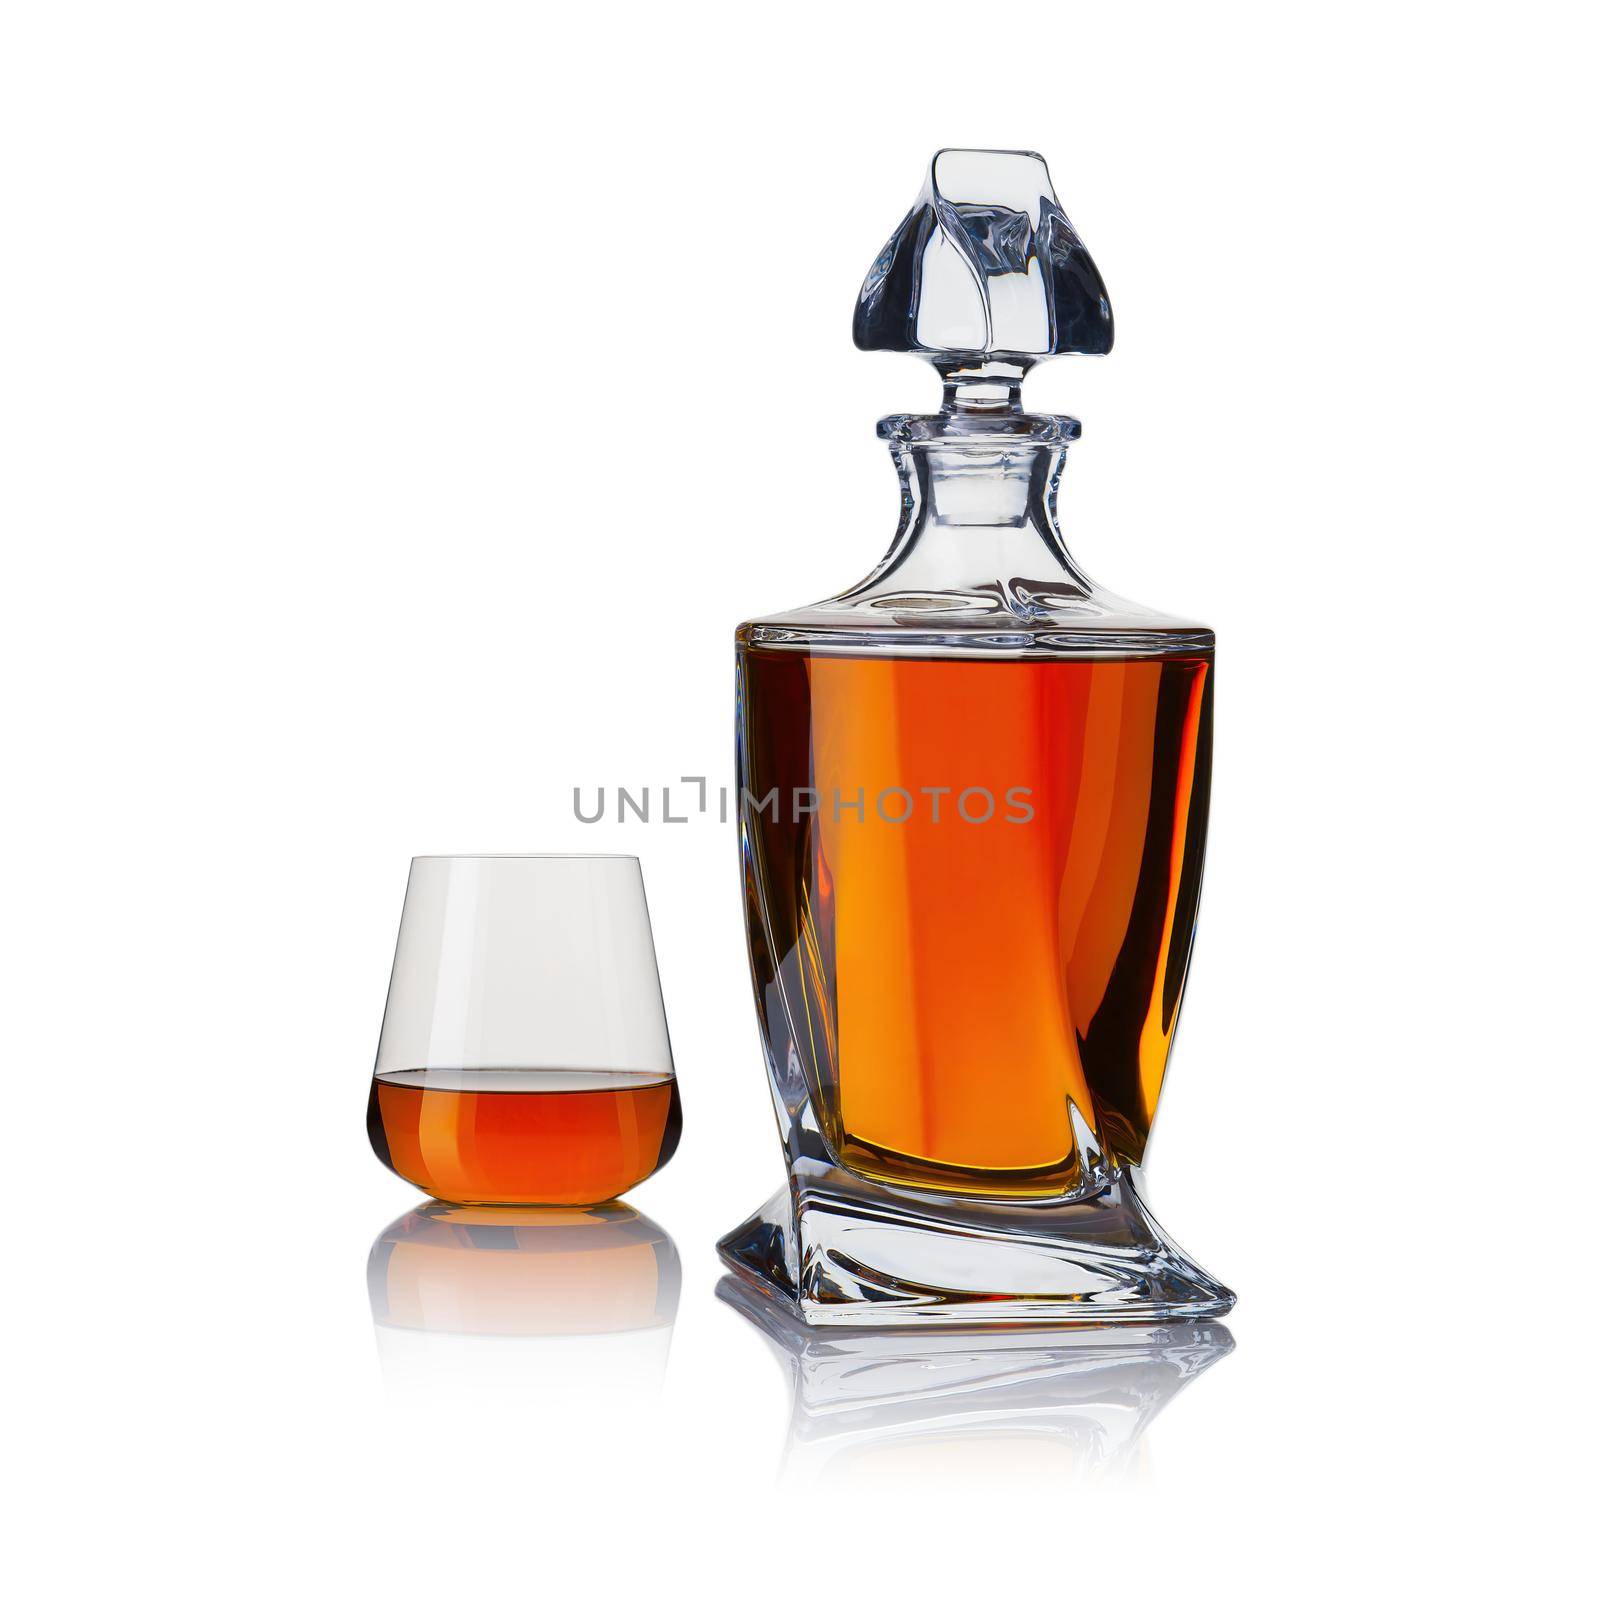 Decanter with whiskey and whiskey glasses. Carafe and glass of whiskey on a white background.